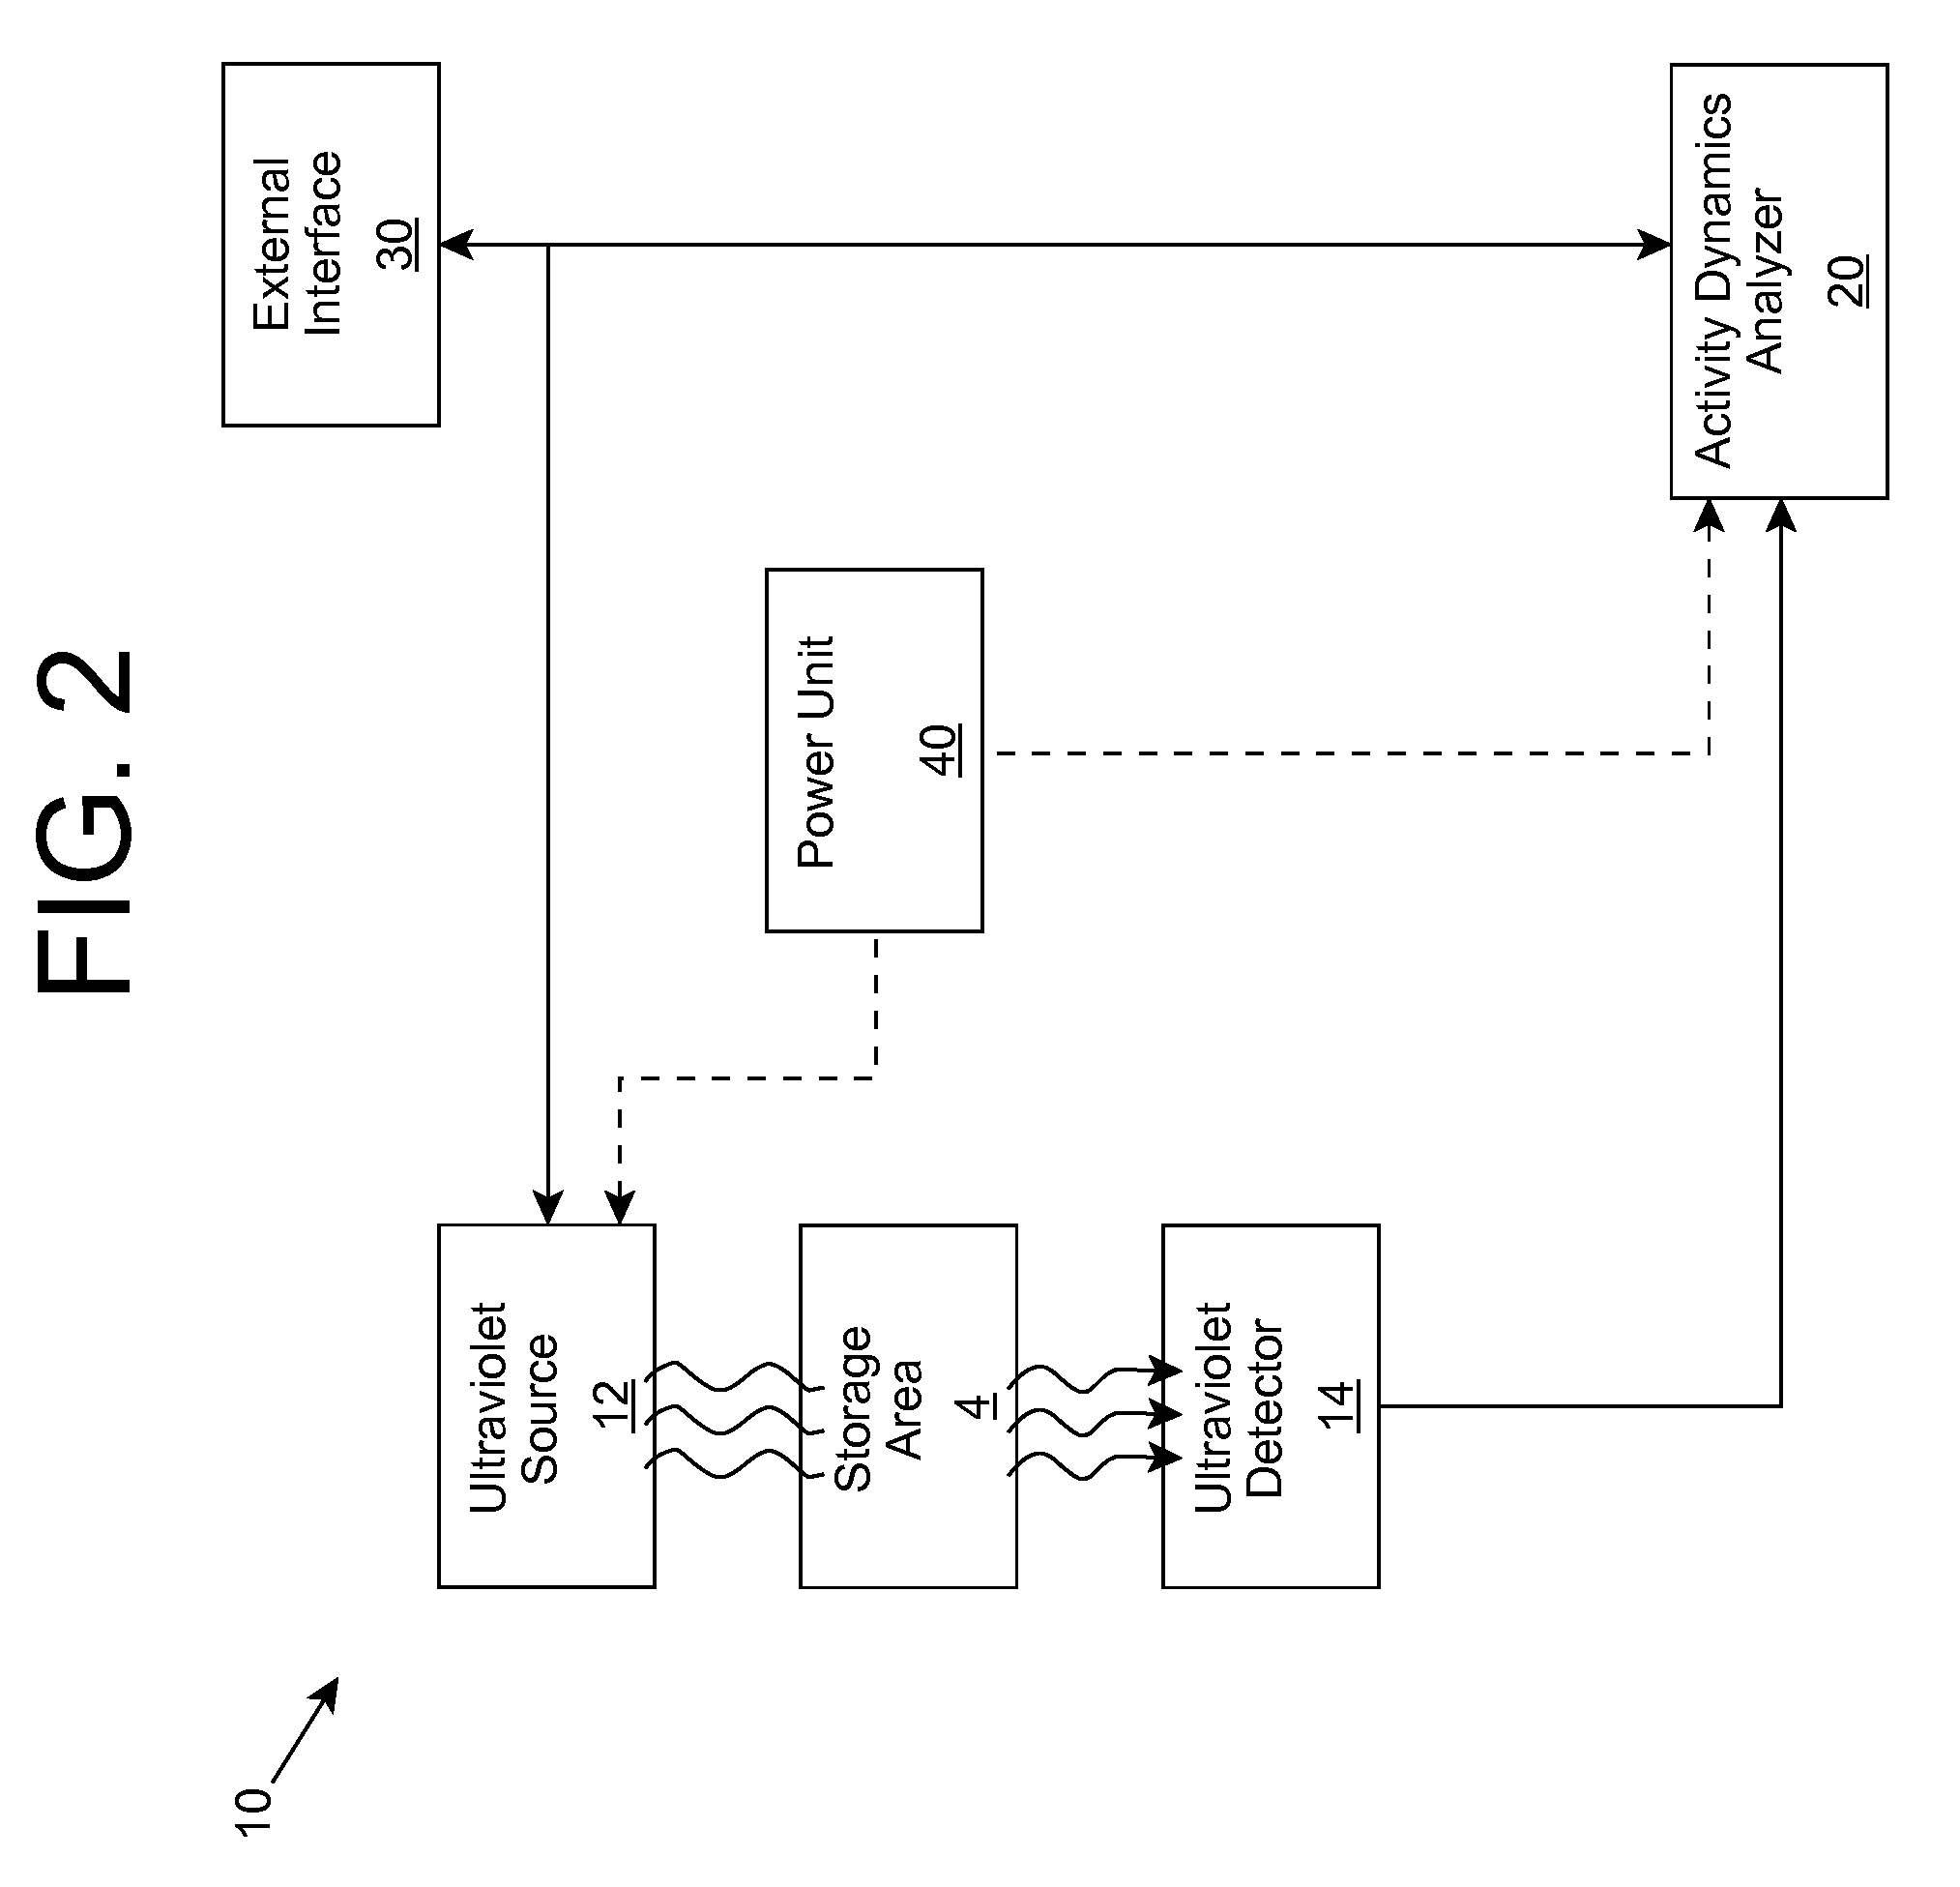 Biological activity monitoring and/or suppression